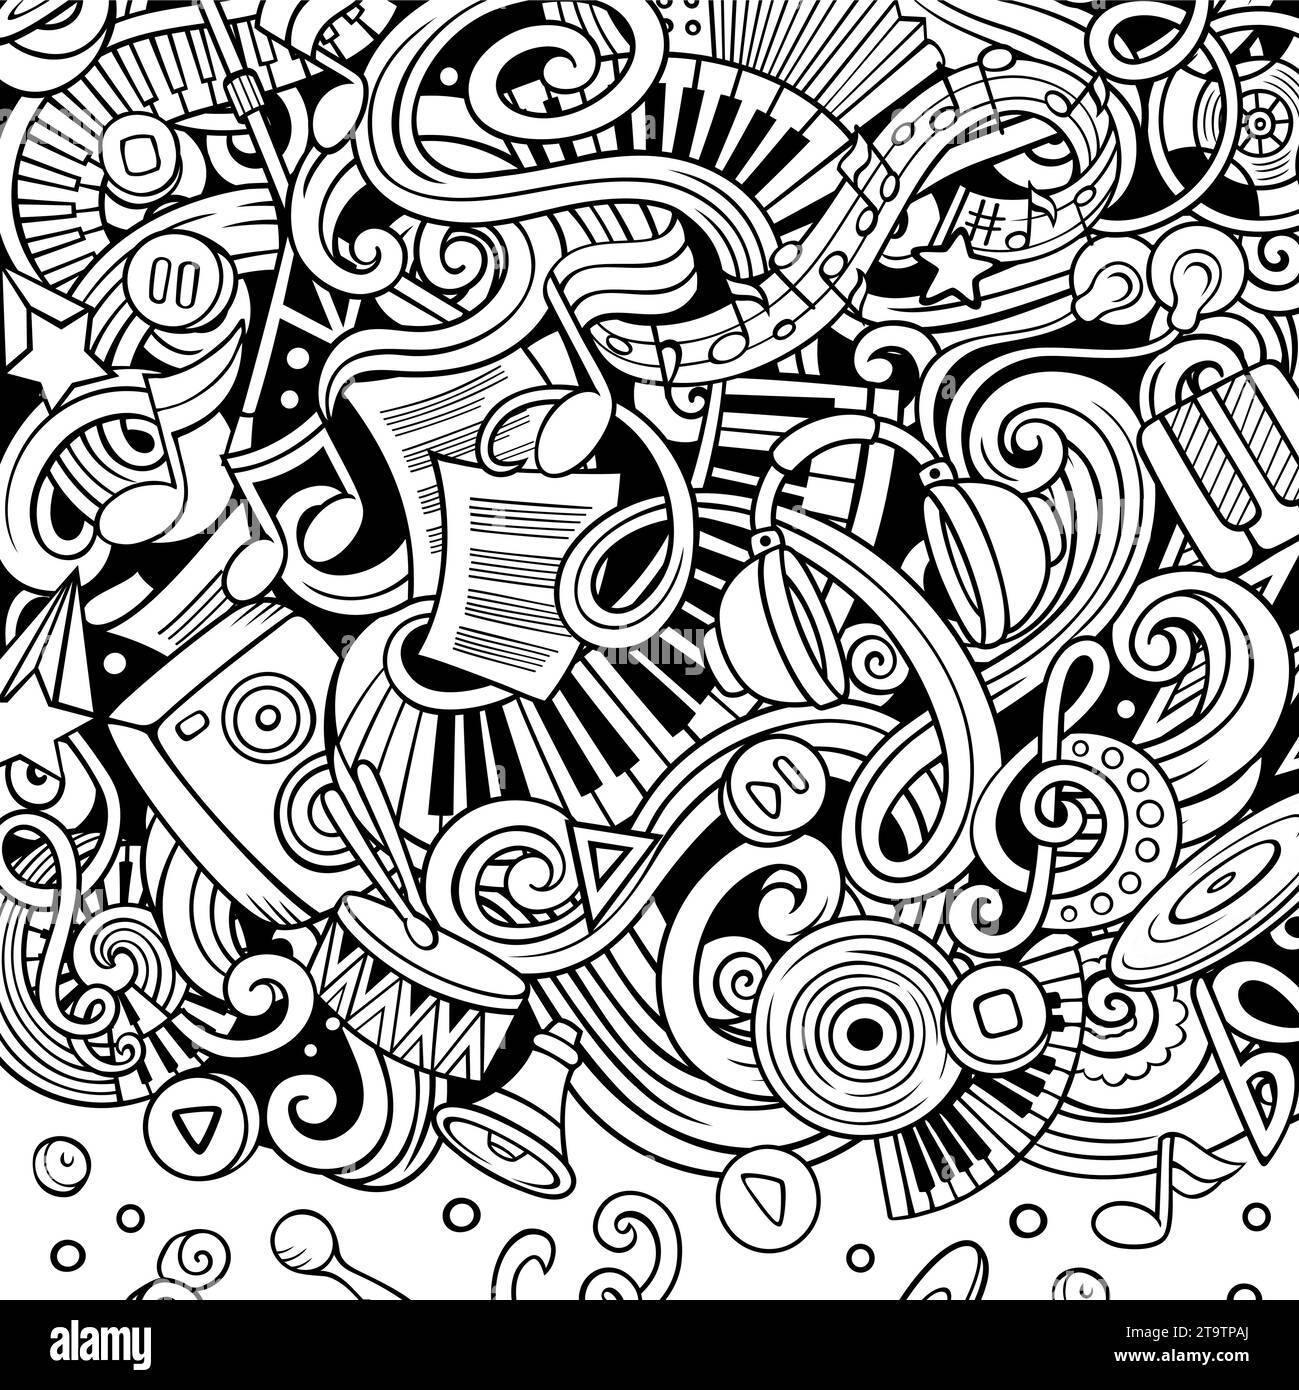 Black and white cartoon pattern on black background, abstract